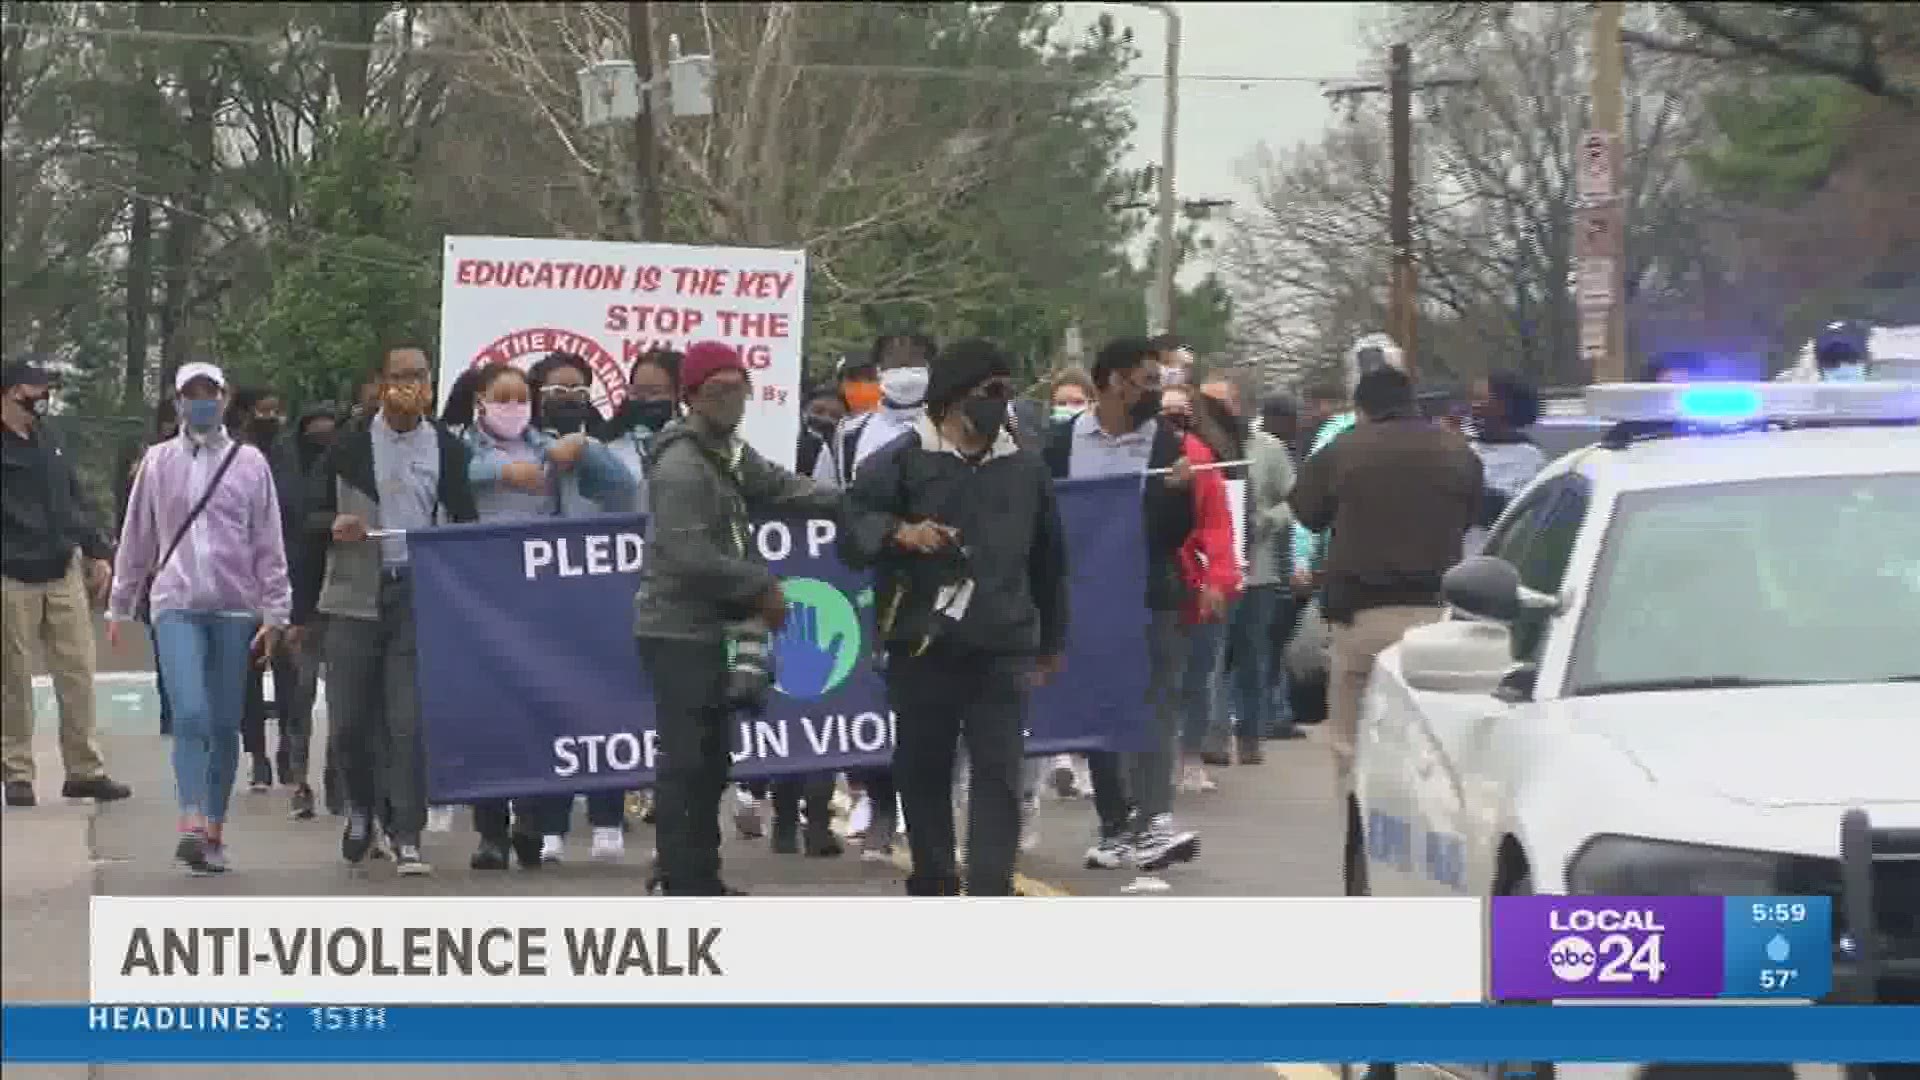 The Anti-Violence Unity Walk brought community members and leaders, city government, and law enforcement together in show of support and advocacy